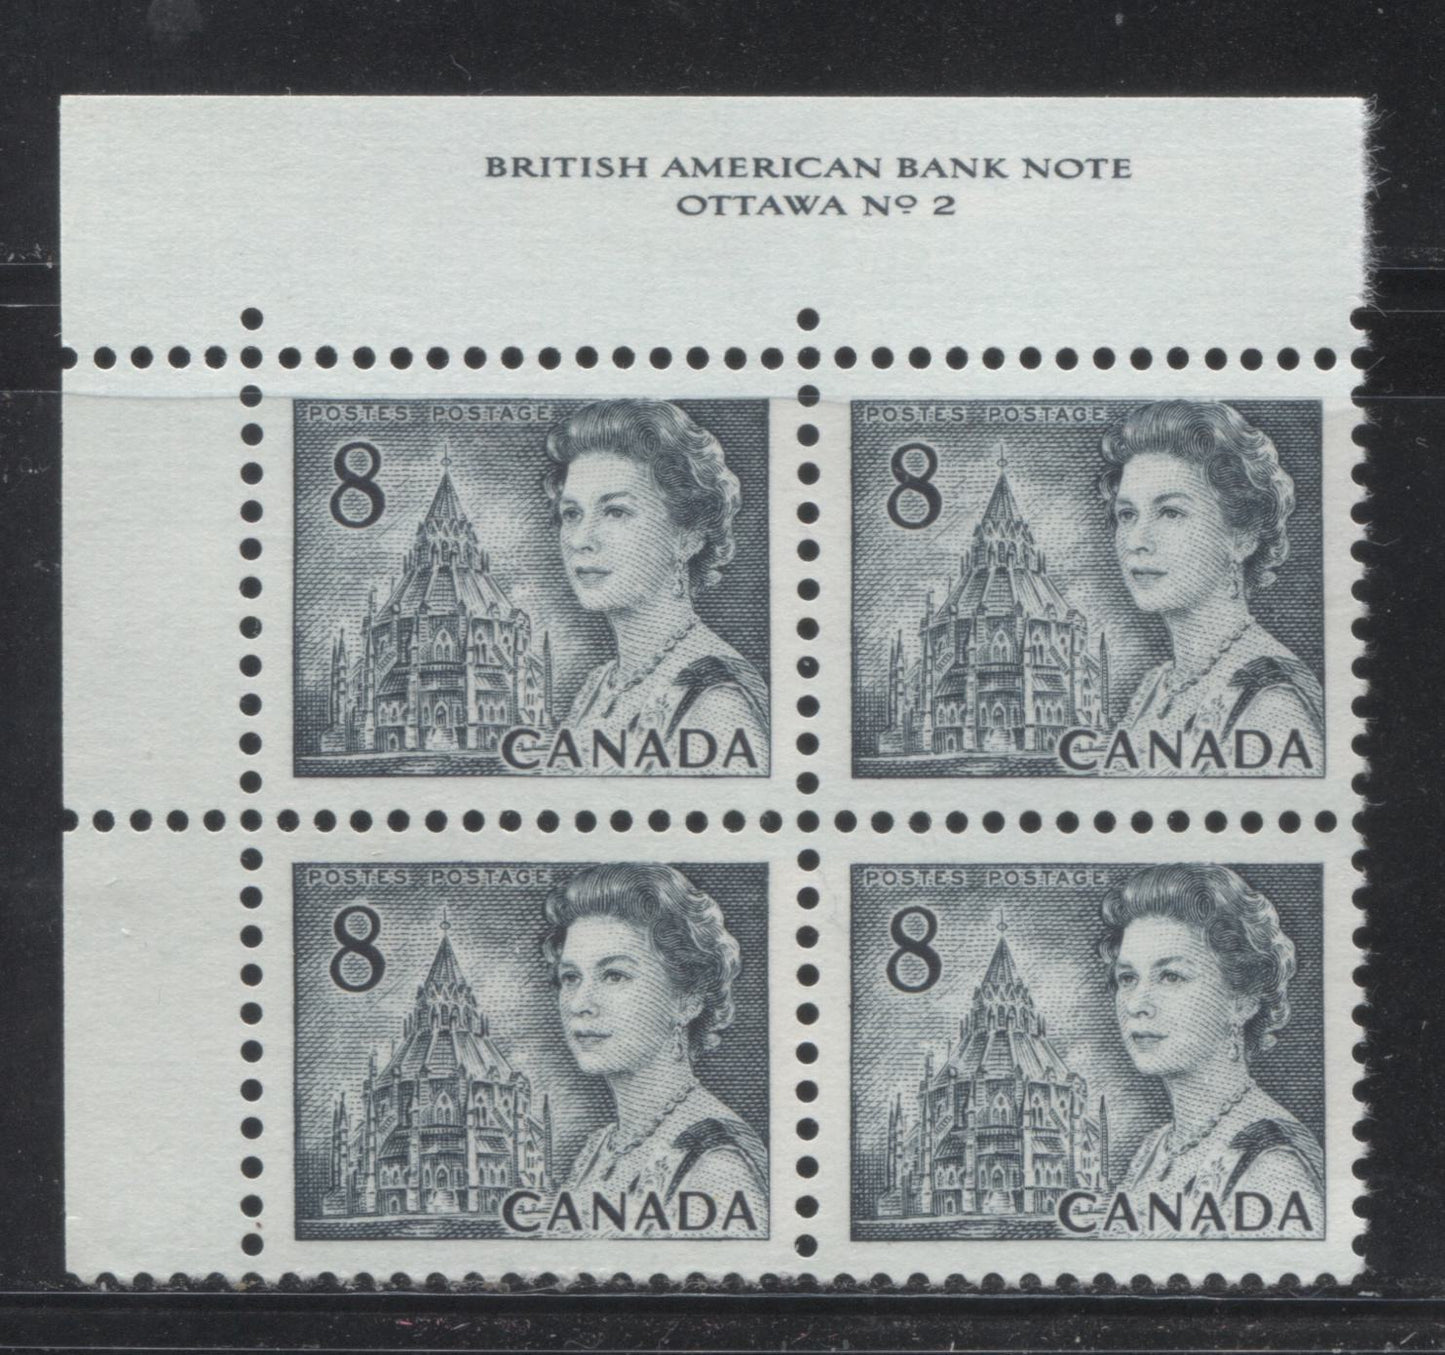 Lot 126 Canada #544v 8c Slate Queen Elizabeth II, 1967-1973 Centennial Issue, A VFNH UL Plate 2 Block Of 4 On DF Grayish White Smooth Paper With Dex Gum